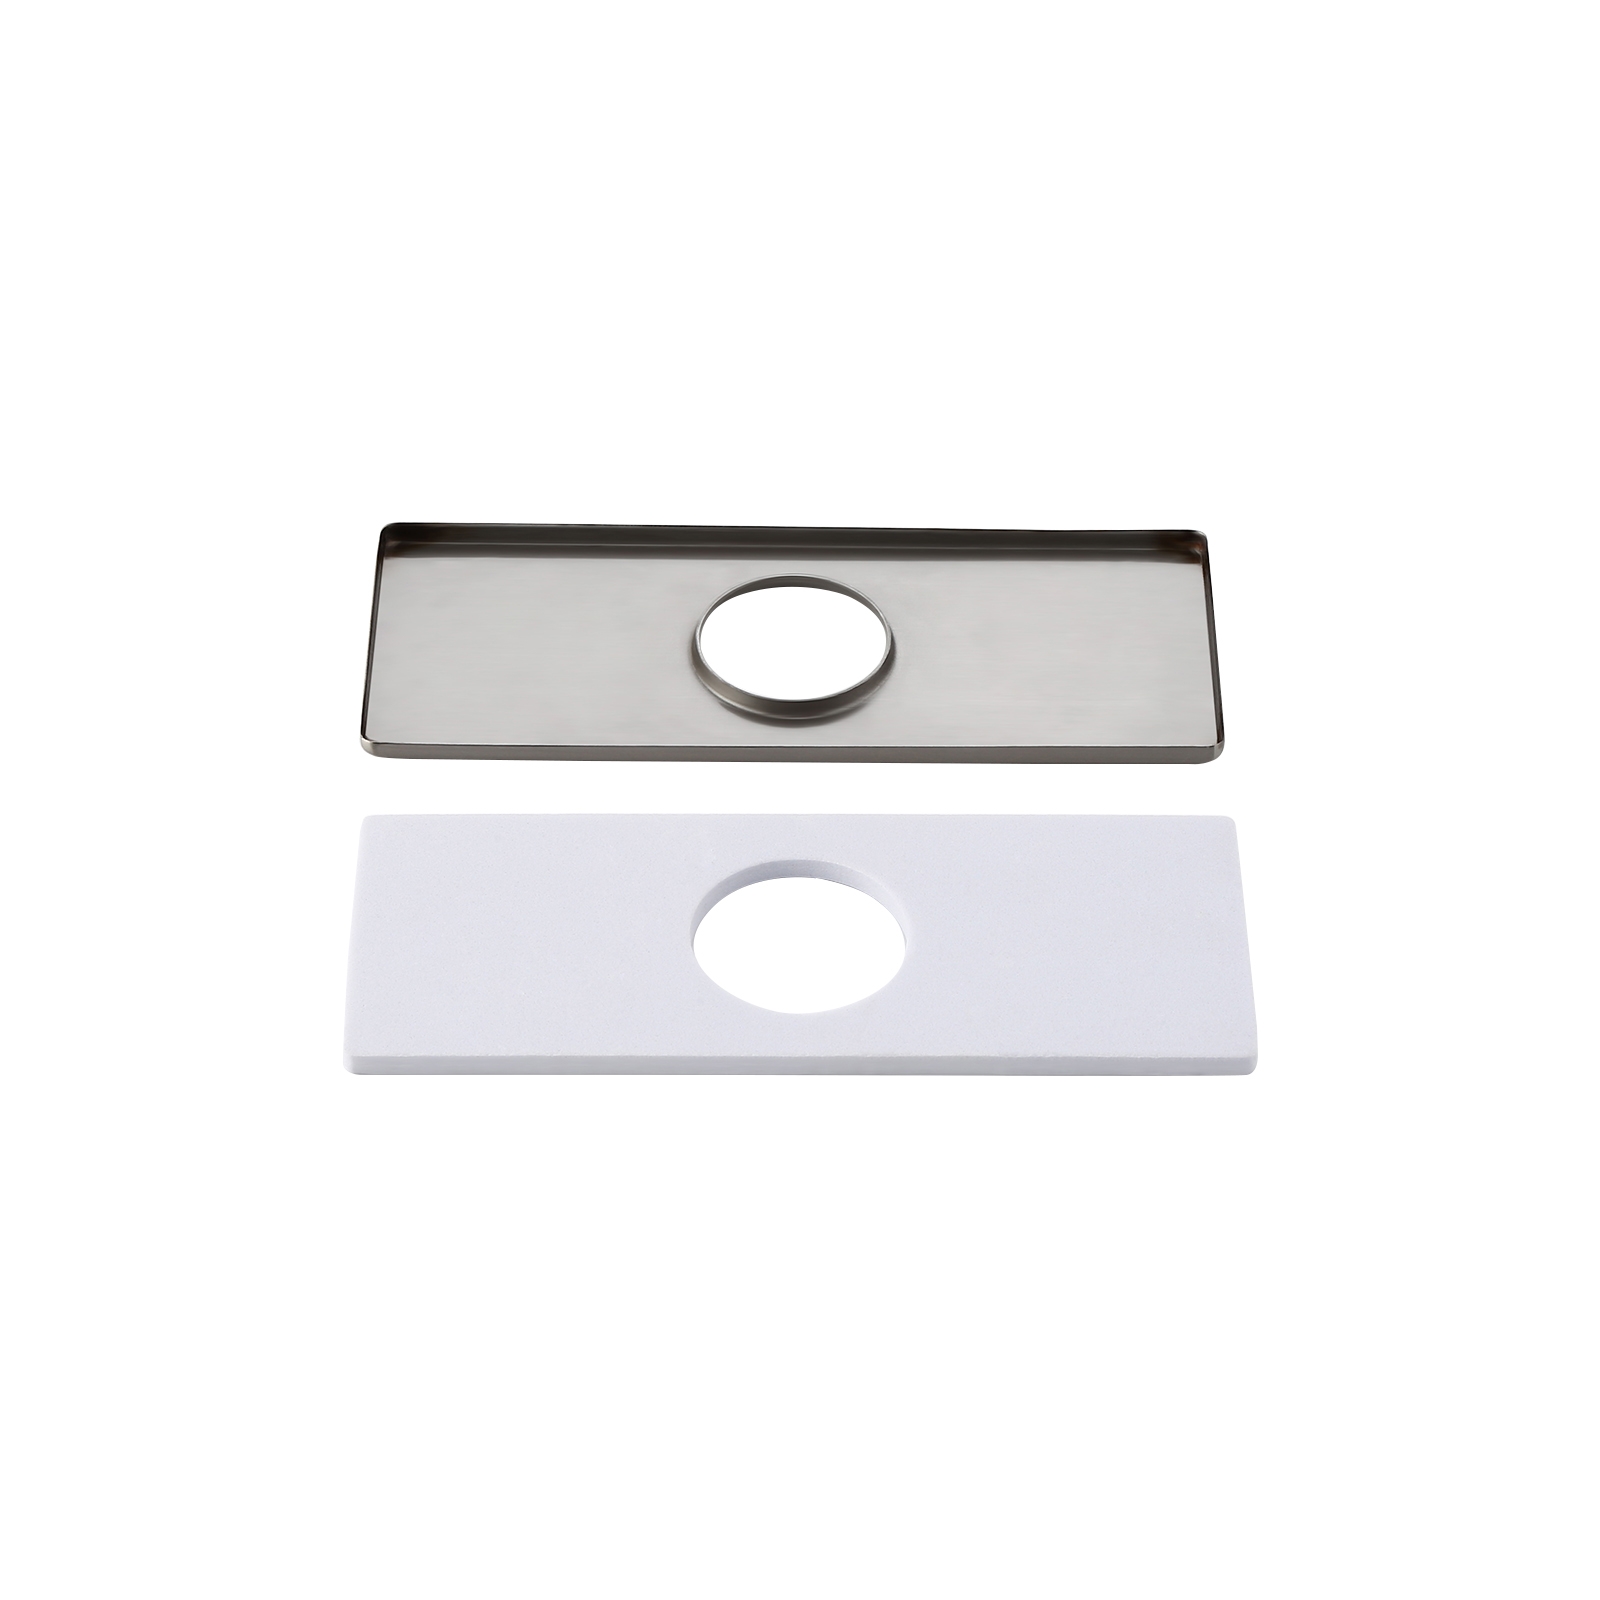 Square Escutcheon Plate Bathroom Vanity Basin Tap Hole Cover Deck Plate Brushed Nickel